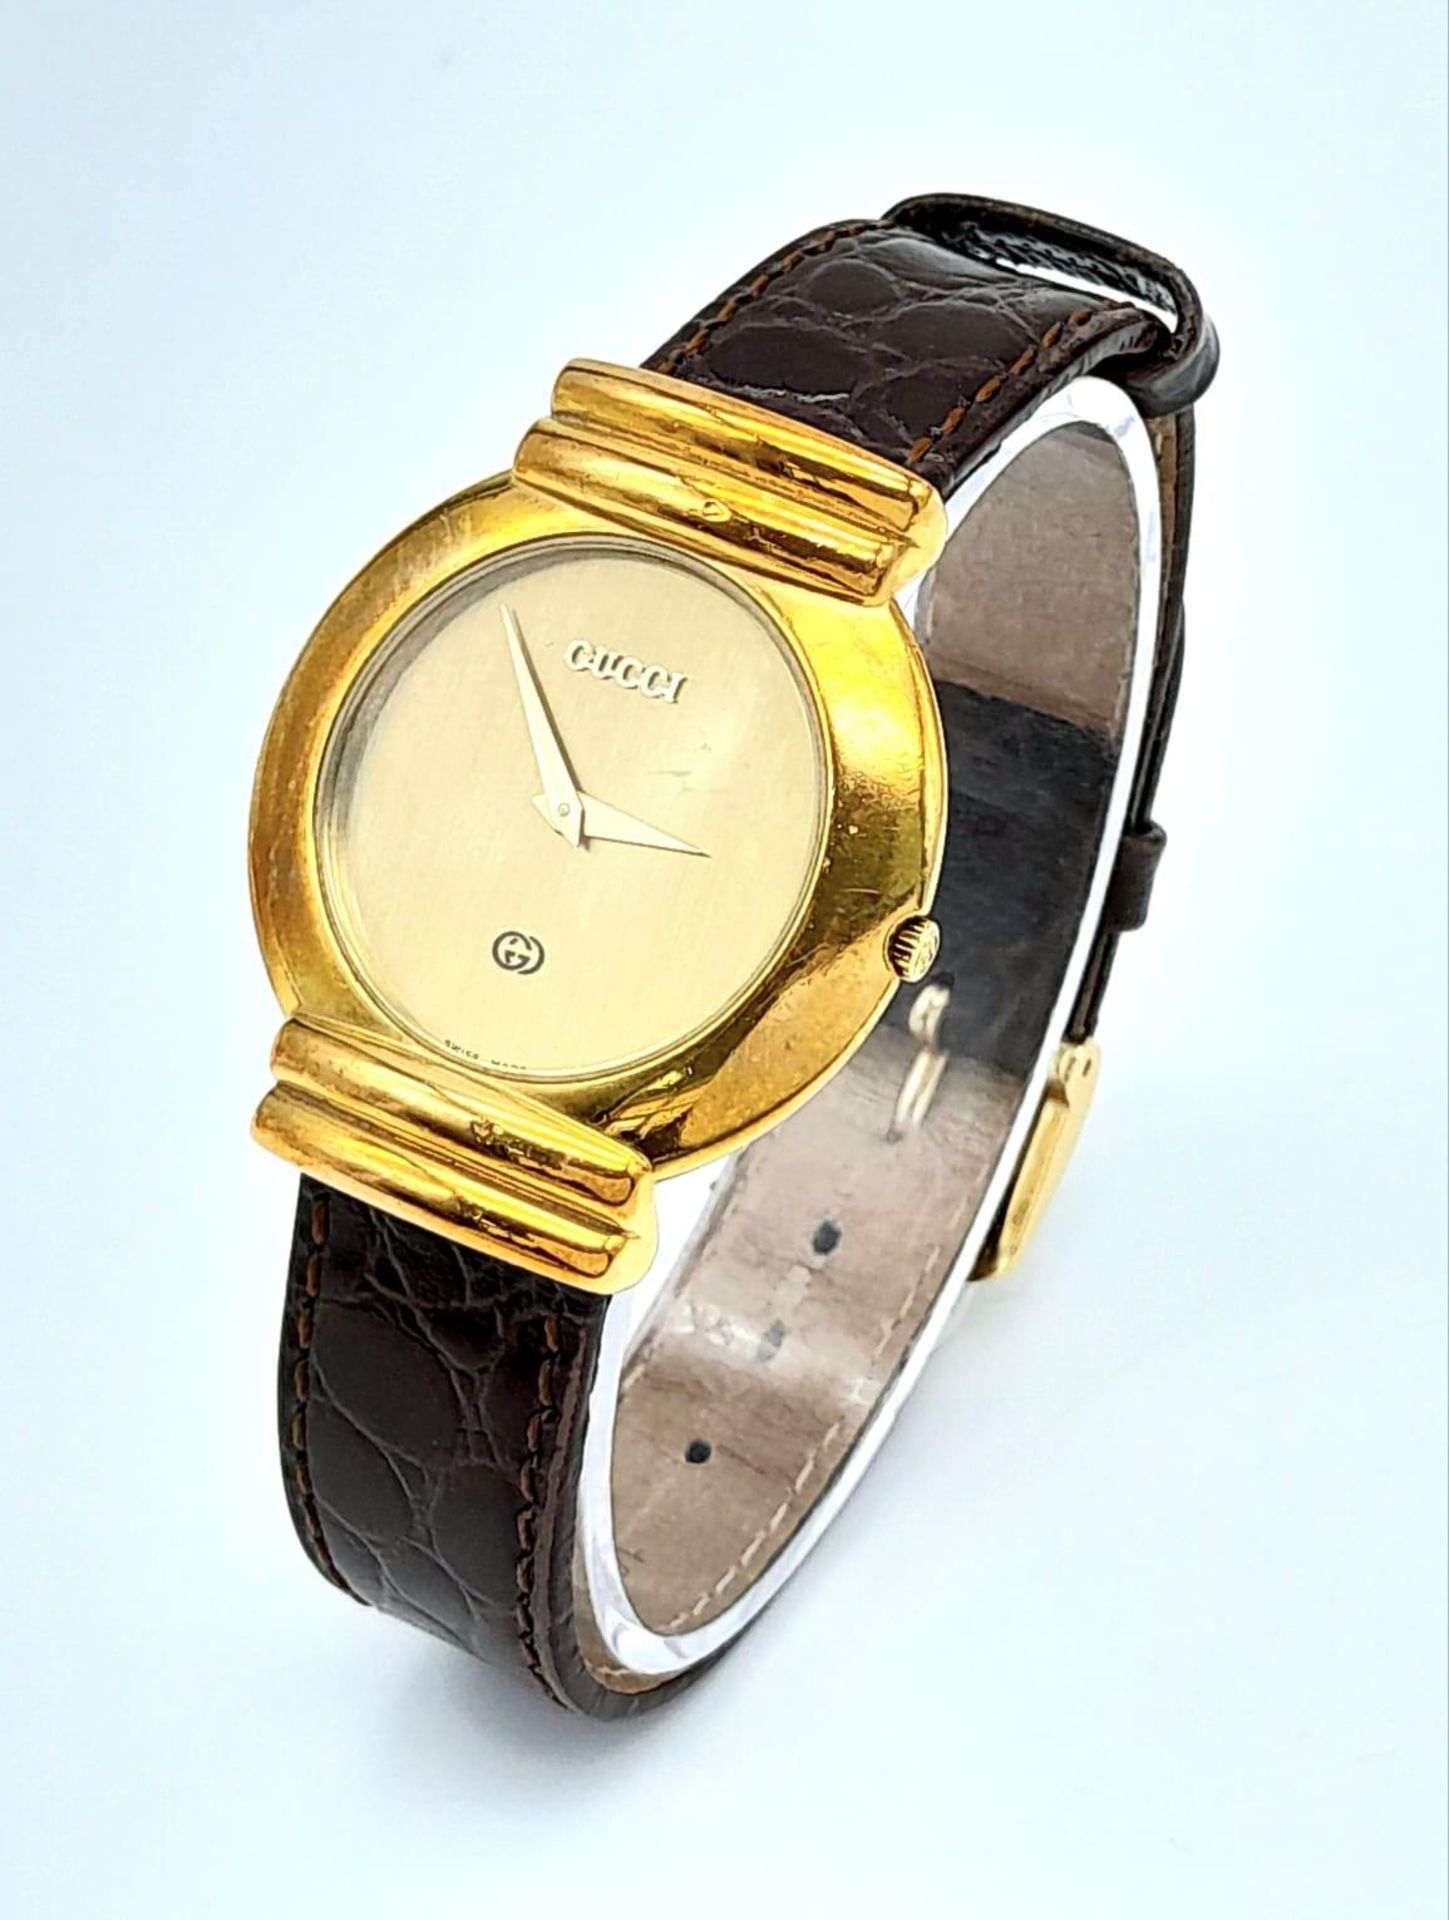 A gold plated GUCCI with crocodile skin strap, case: 33 mm, gold coloured dial and hands, Swiss made